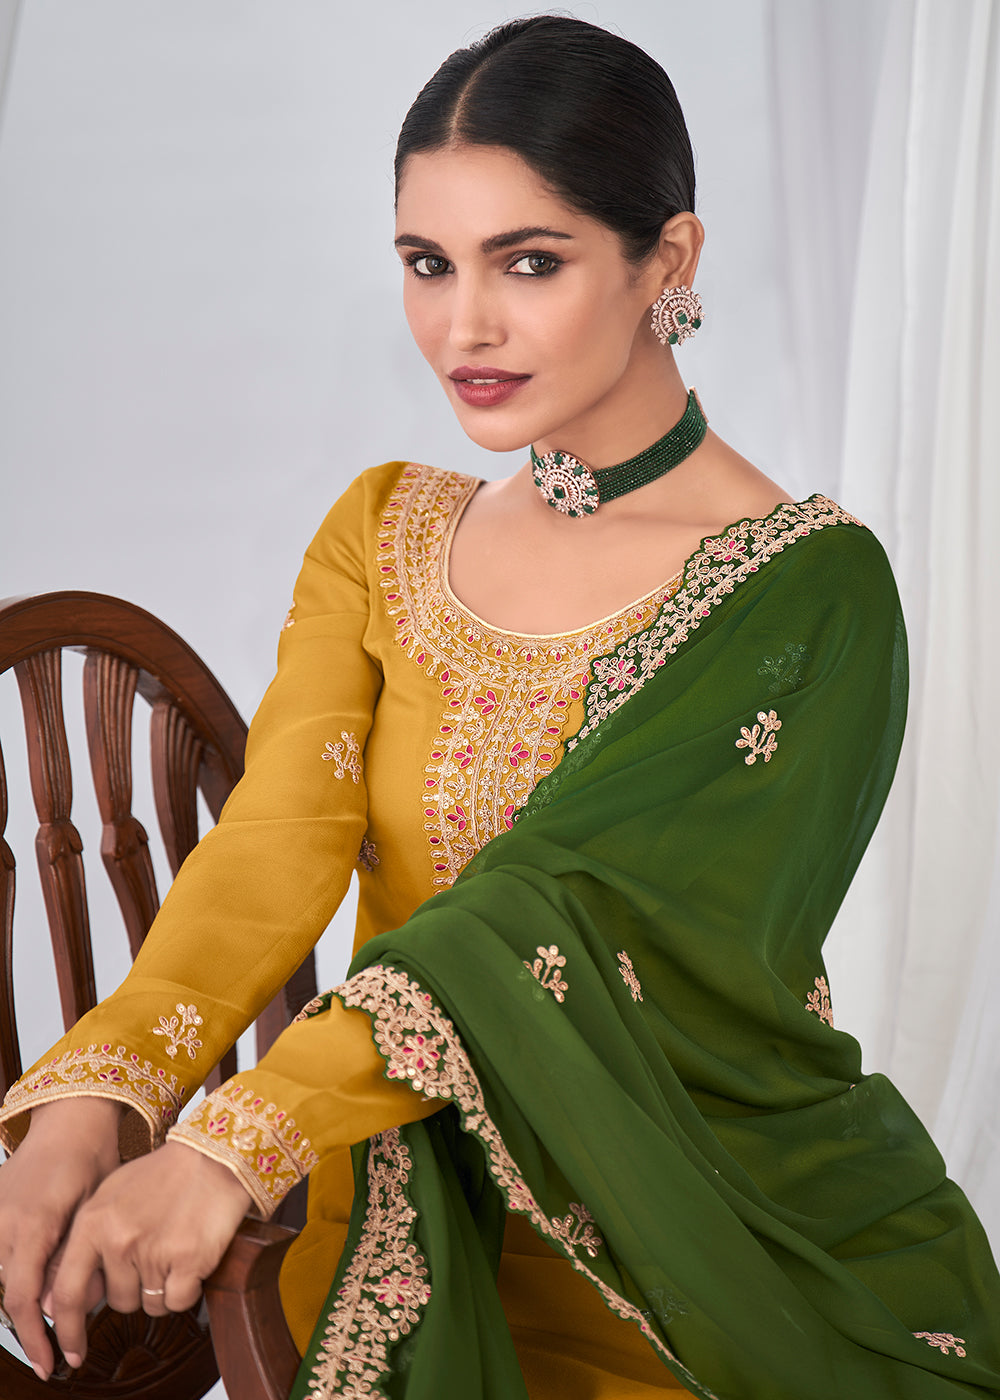 Buy Now Good Looking Yellow Indian Party Wear Salwar Suit Online in USA, UK, Canada, Germany & Worldwide at Empress Clothing